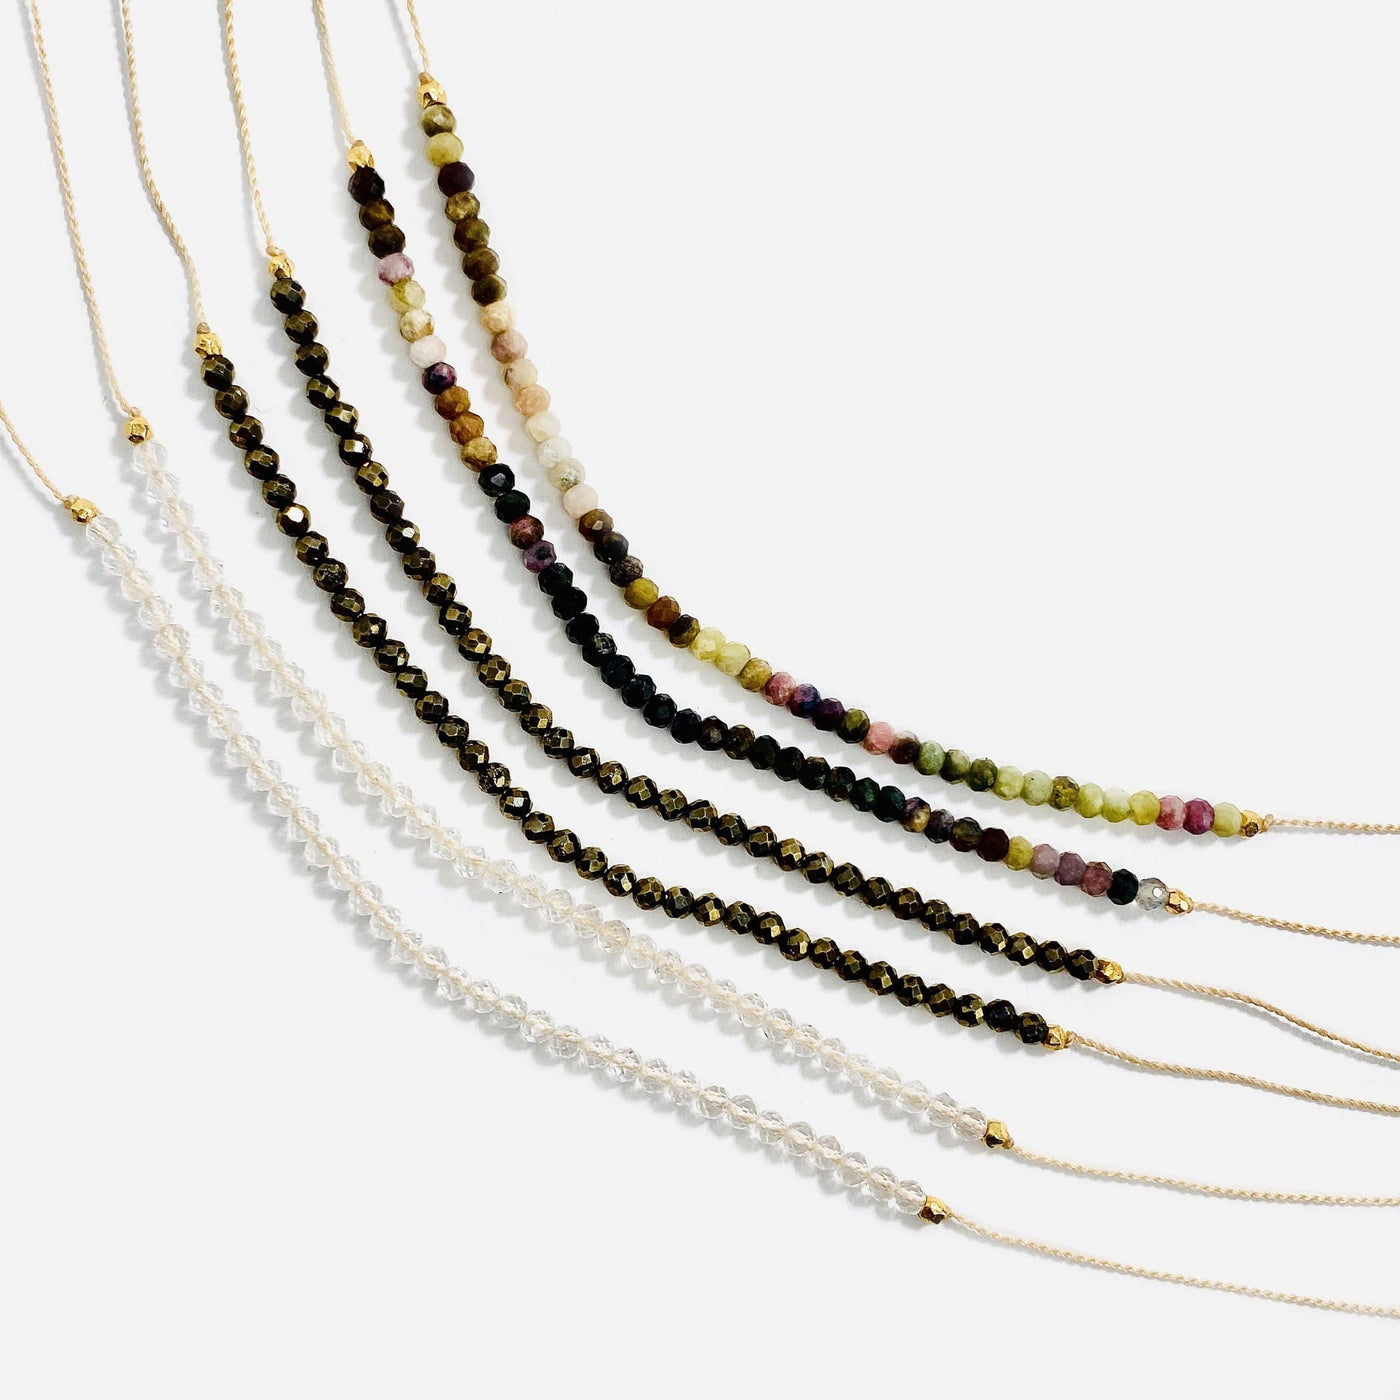 Gemstone Bead Finished Necklaces three different types of stones on a white background